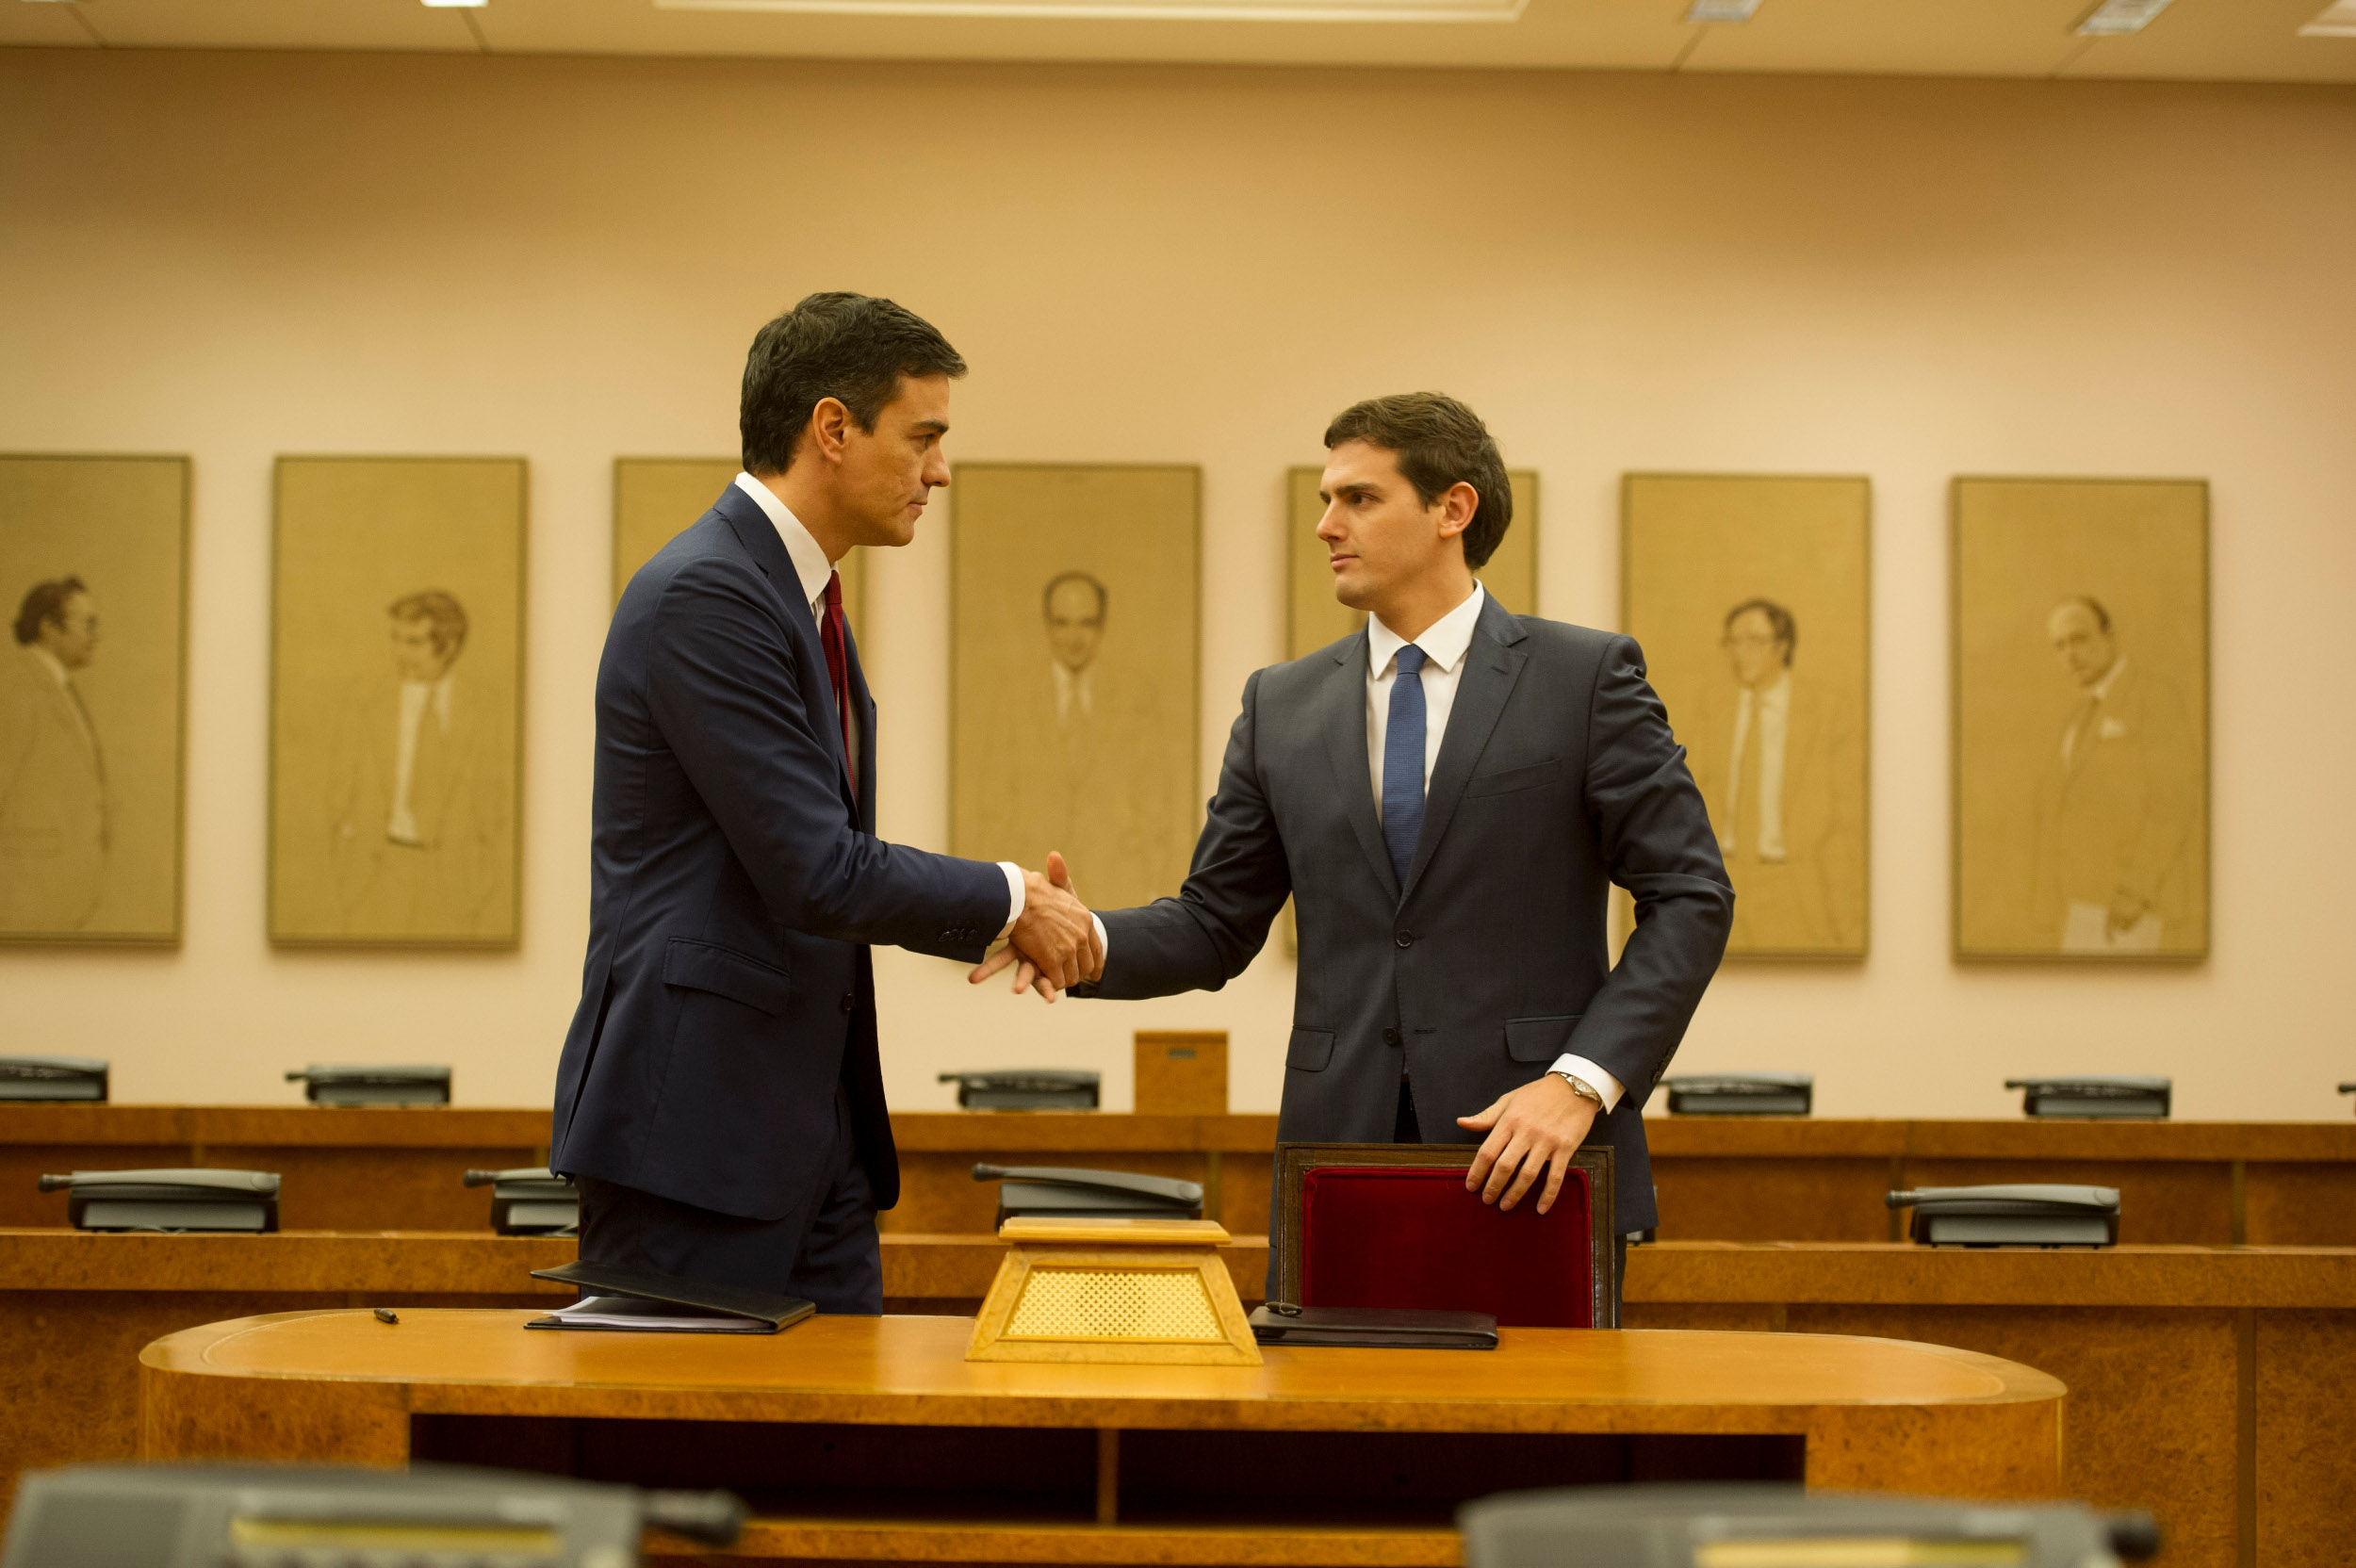 PSOE's leader, Pedro Sánchez and anti-Catalan nationalism 'Ciutadans' leader, Albert Rivera, reached an agreement to form government (by ACN)